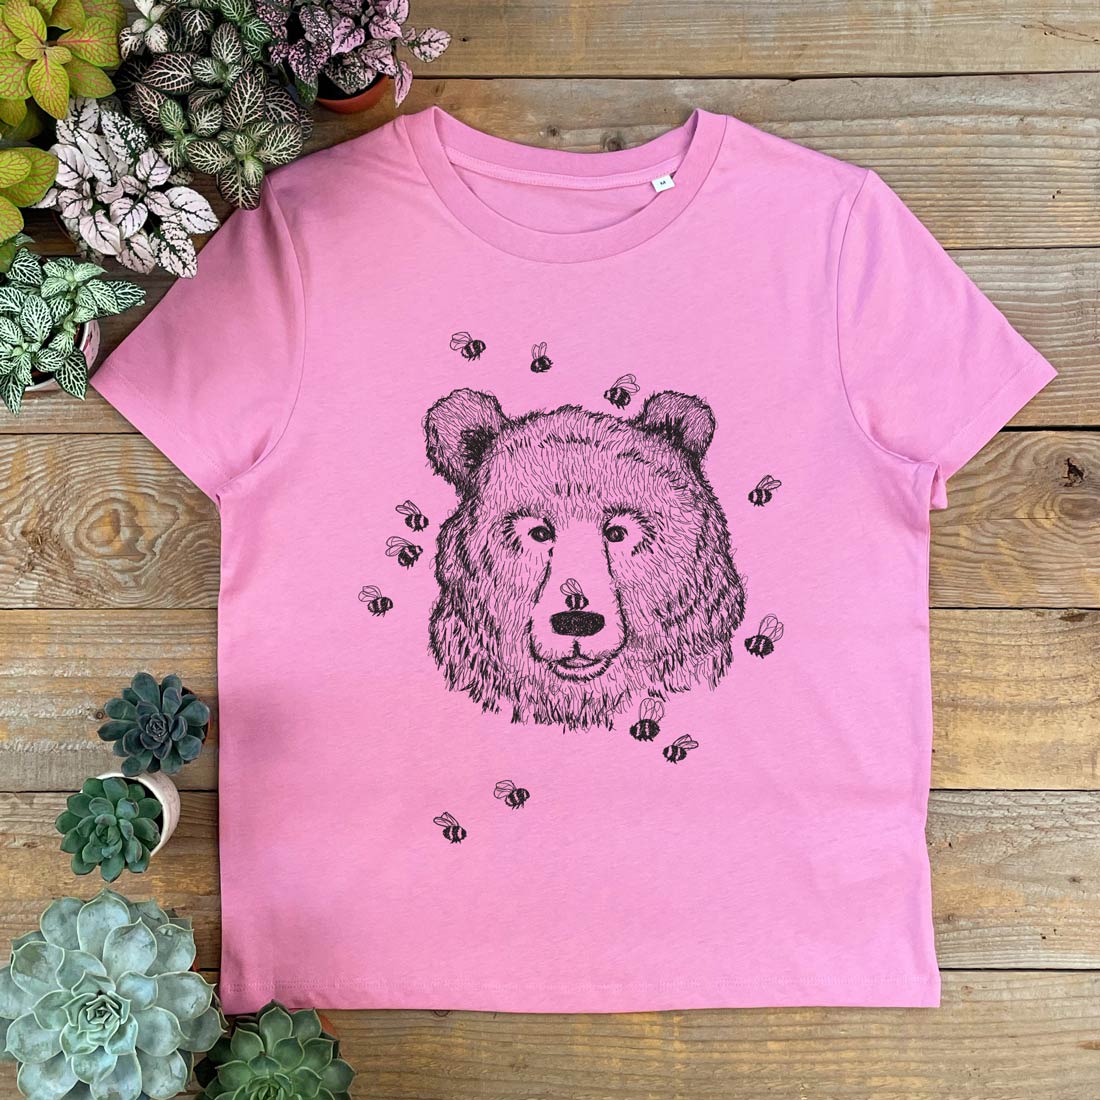 pink tshirt with bear and bees